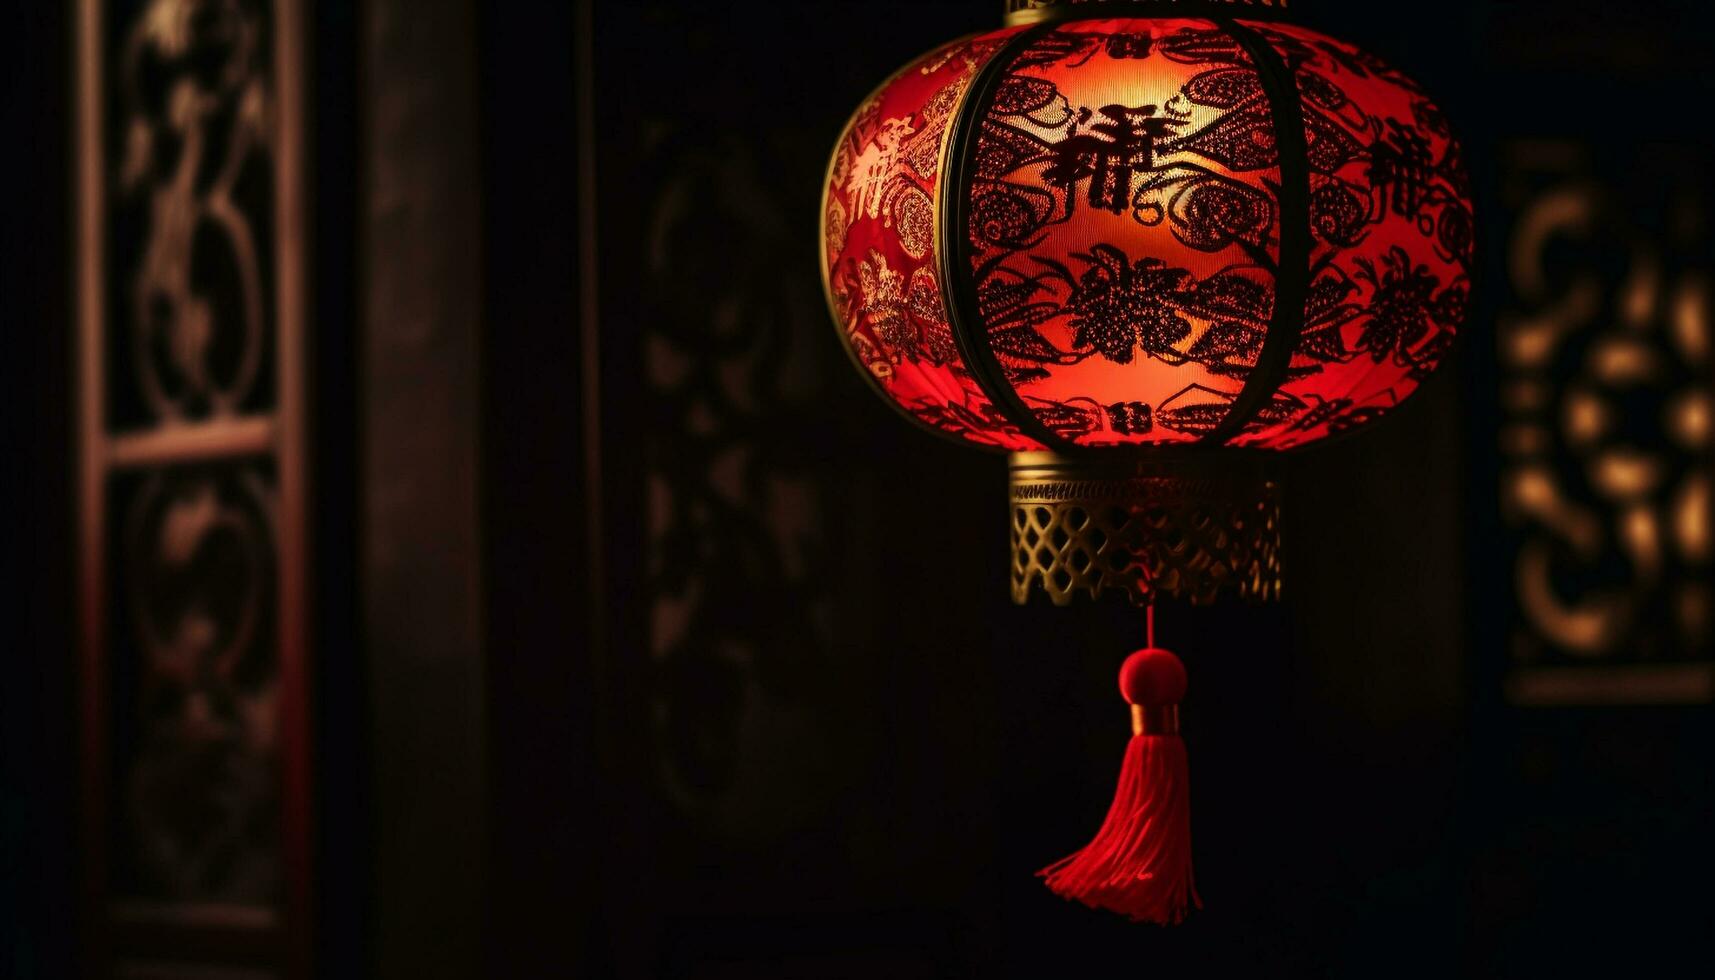 The illuminated paper lantern, a symbol of Chinese culture generated by AI photo